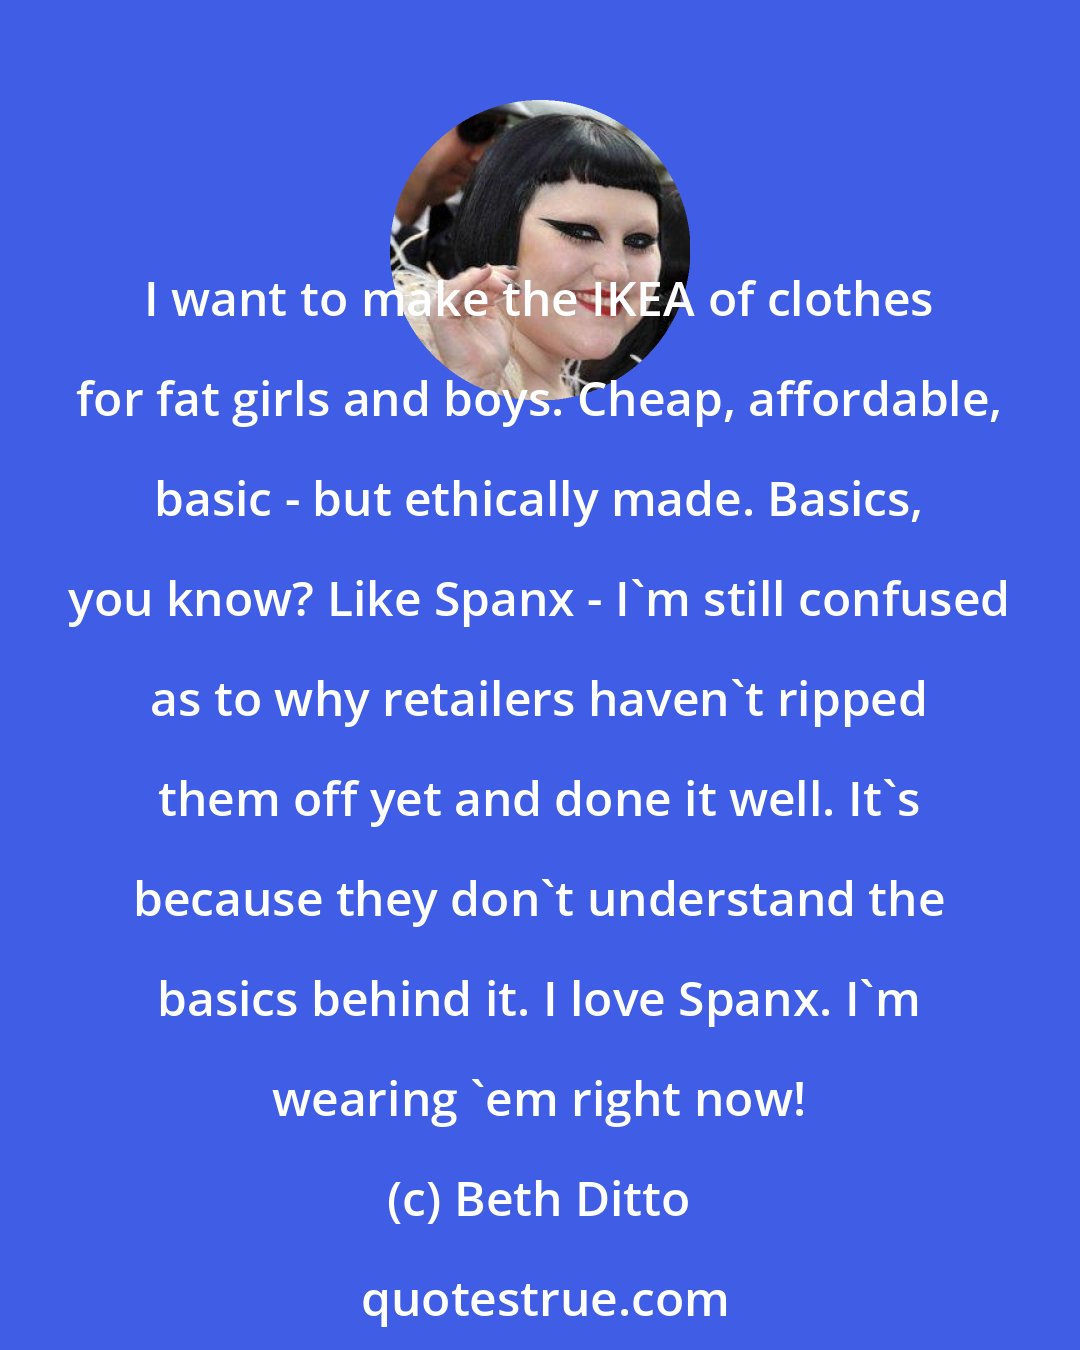 Beth Ditto: I want to make the IKEA of clothes for fat girls and boys. Cheap, affordable, basic - but ethically made. Basics, you know? Like Spanx - I'm still confused as to why retailers haven't ripped them off yet and done it well. It's because they don't understand the basics behind it. I love Spanx. I'm wearing 'em right now!